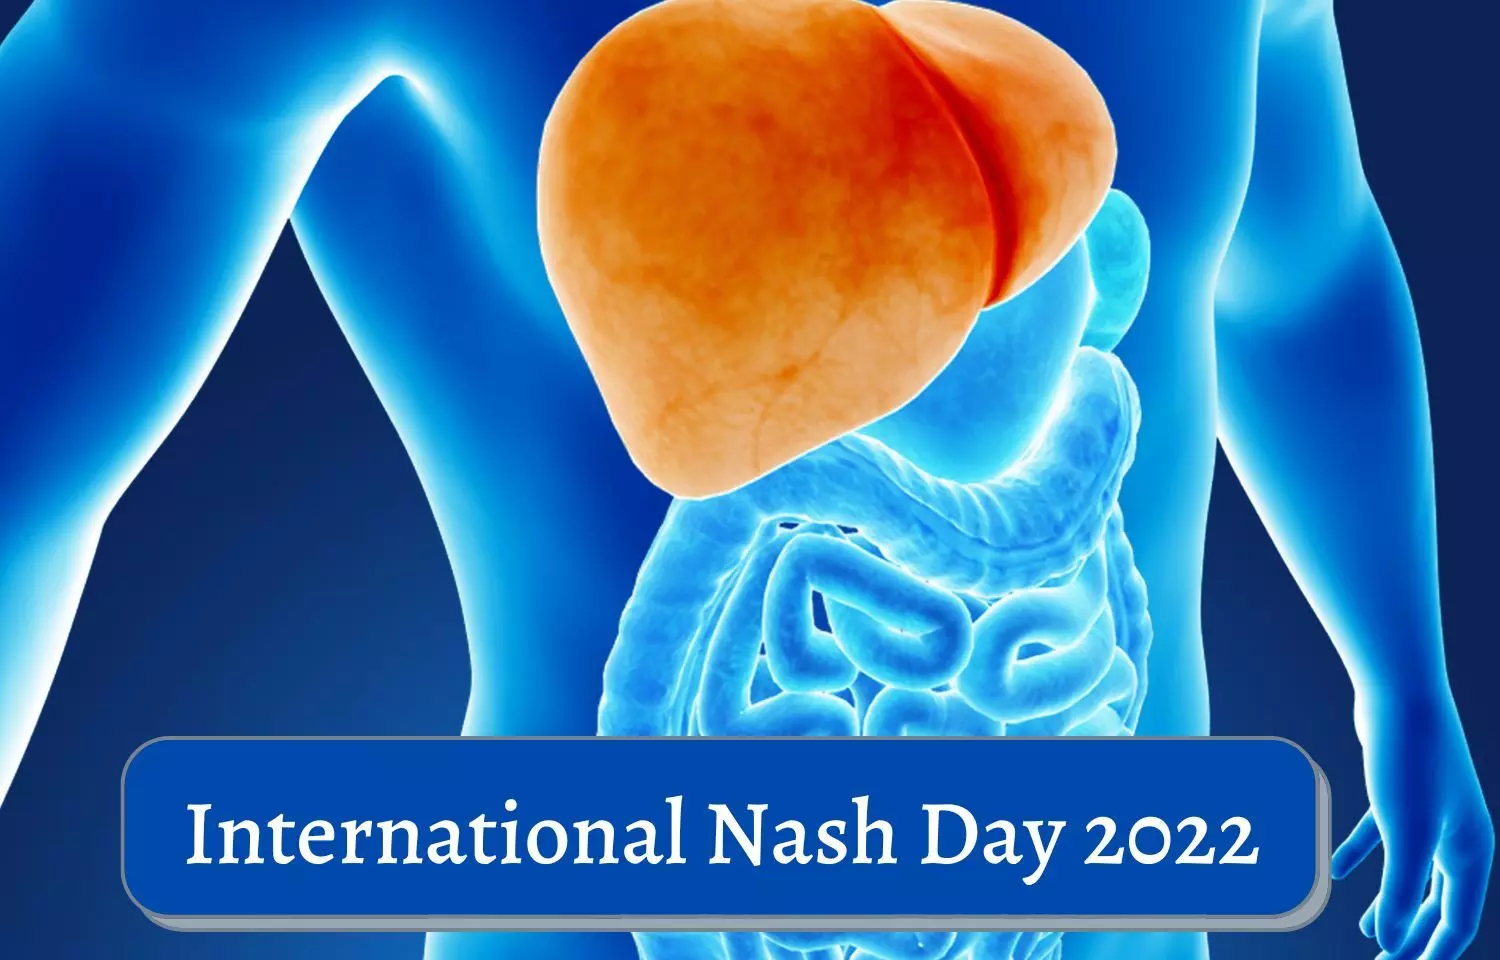 Anti-diabetic drug and NASH: Current Options in 2022